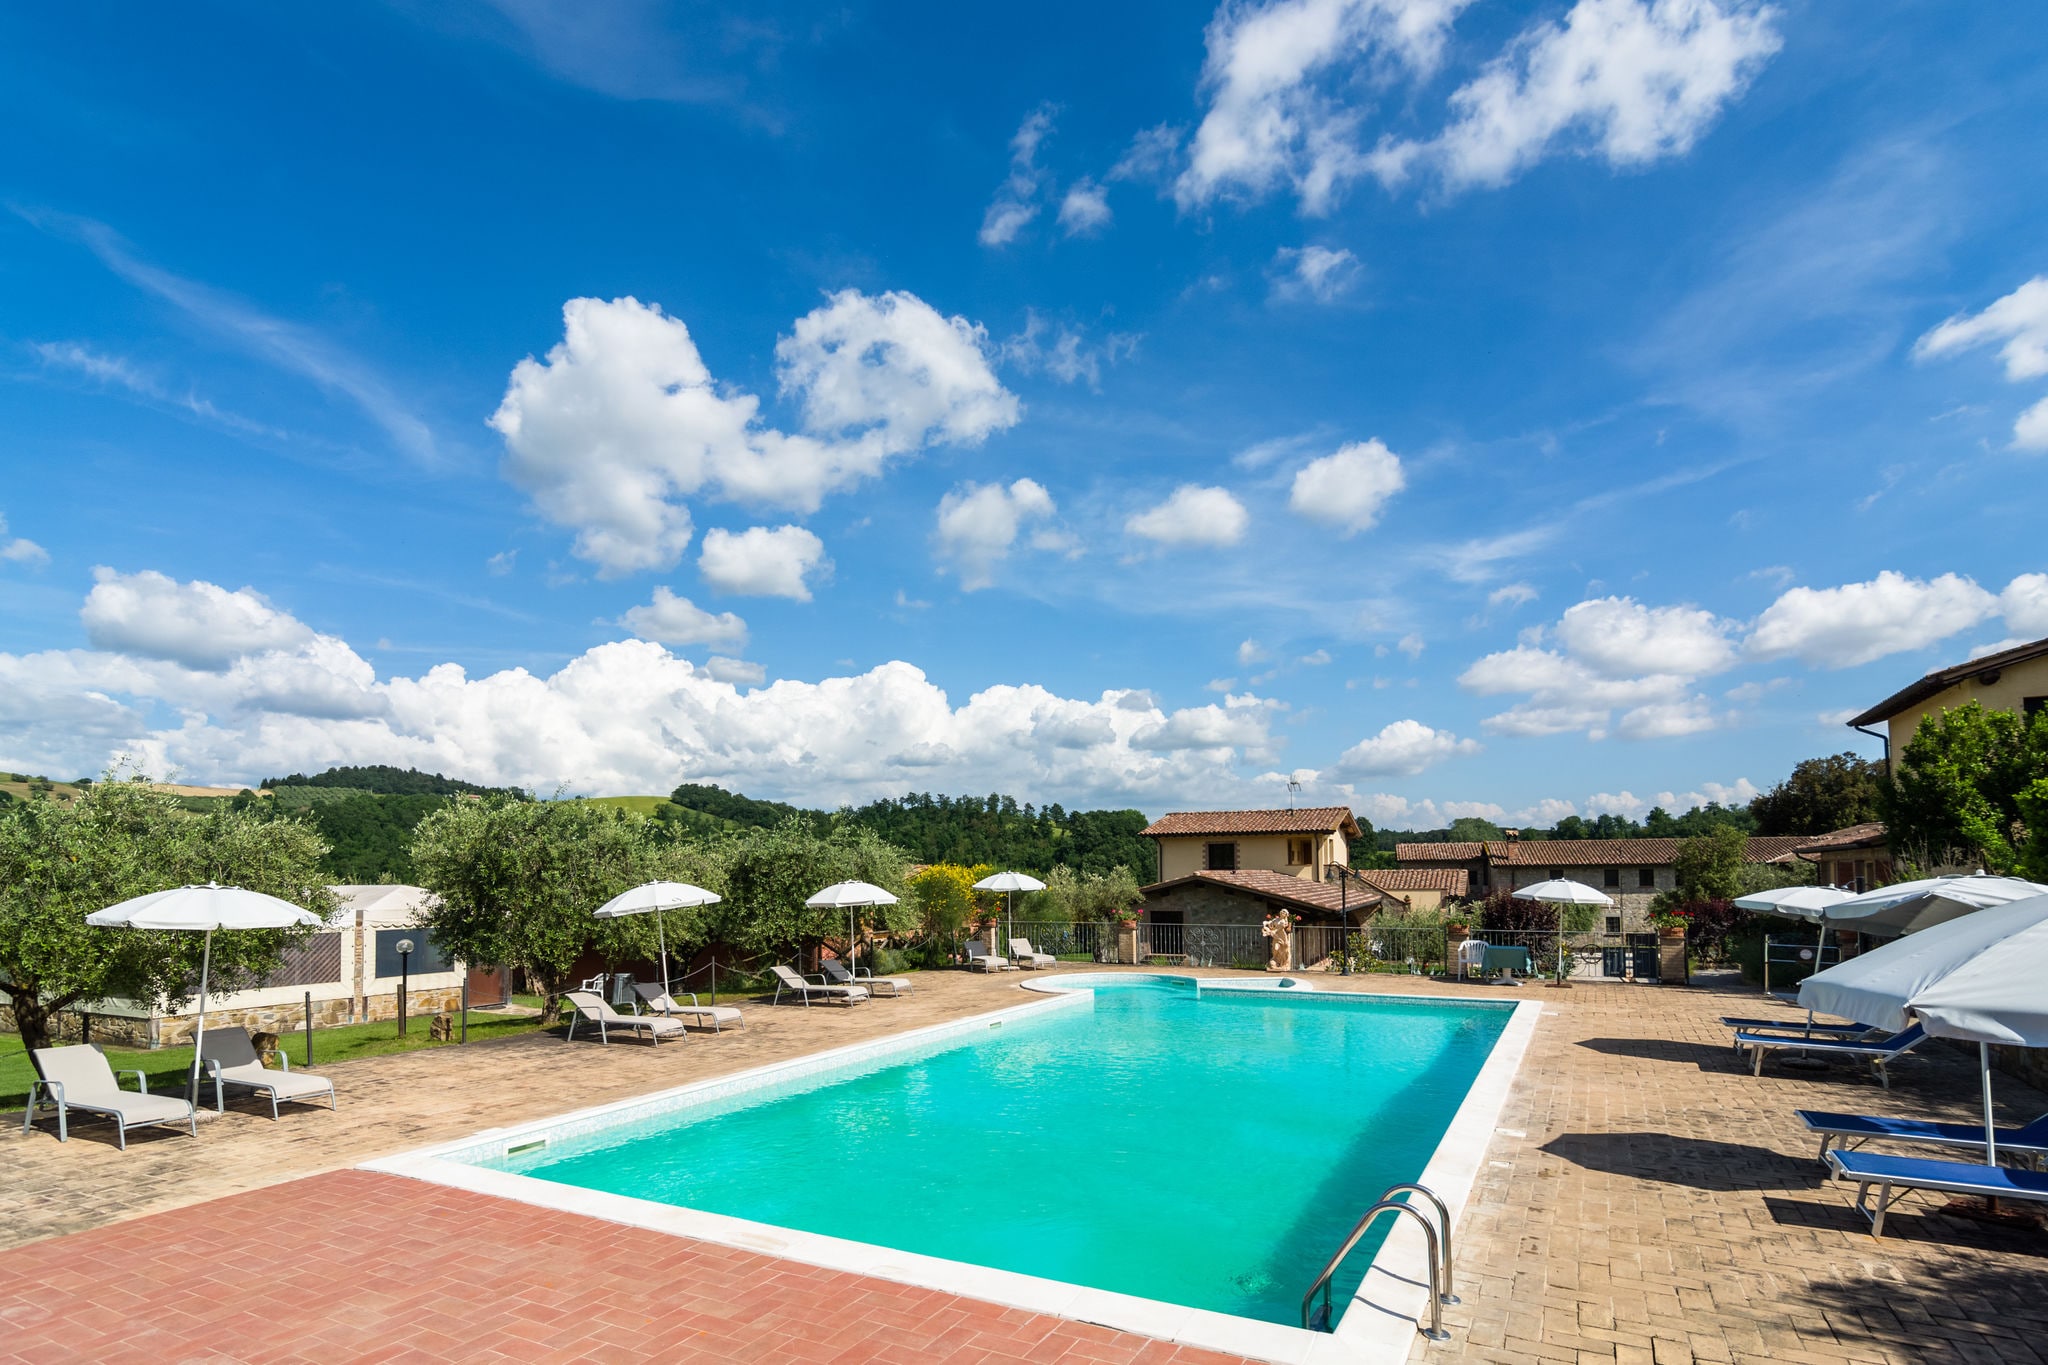 Farmhouse in Perugia with Jacuzzi, Swimming Pool, Garden, BBQ